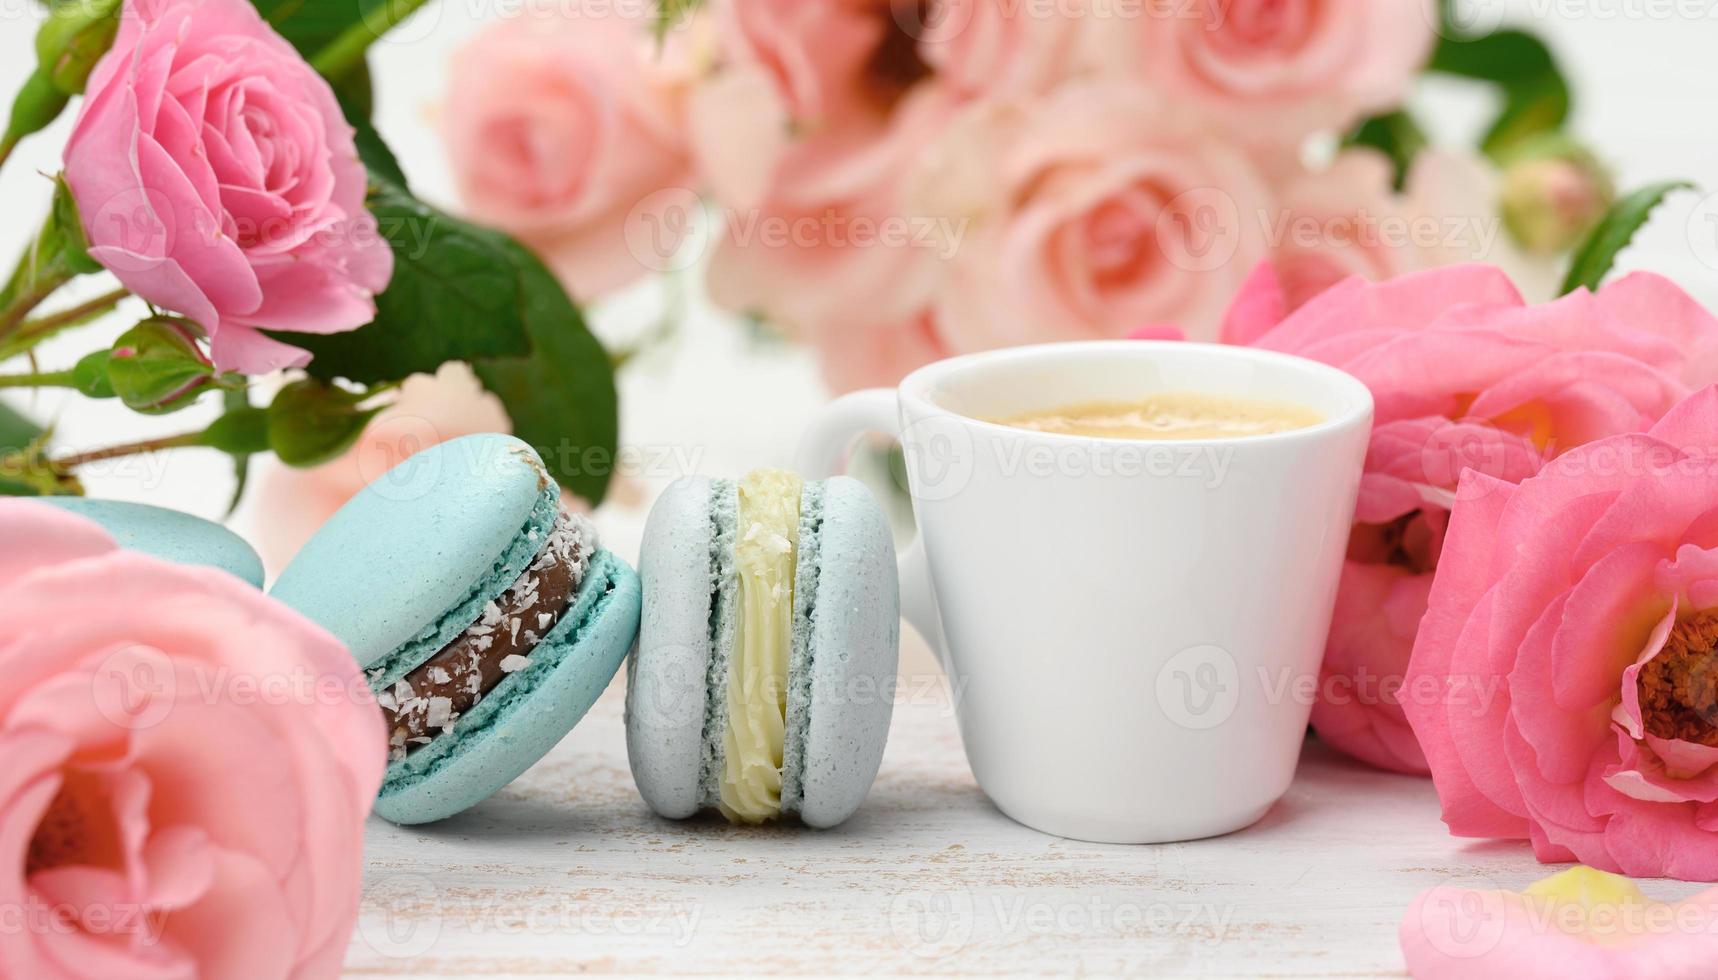 white ceramic cup with coffee and  macarons on a white table, behind a bouquet of pink roses photo